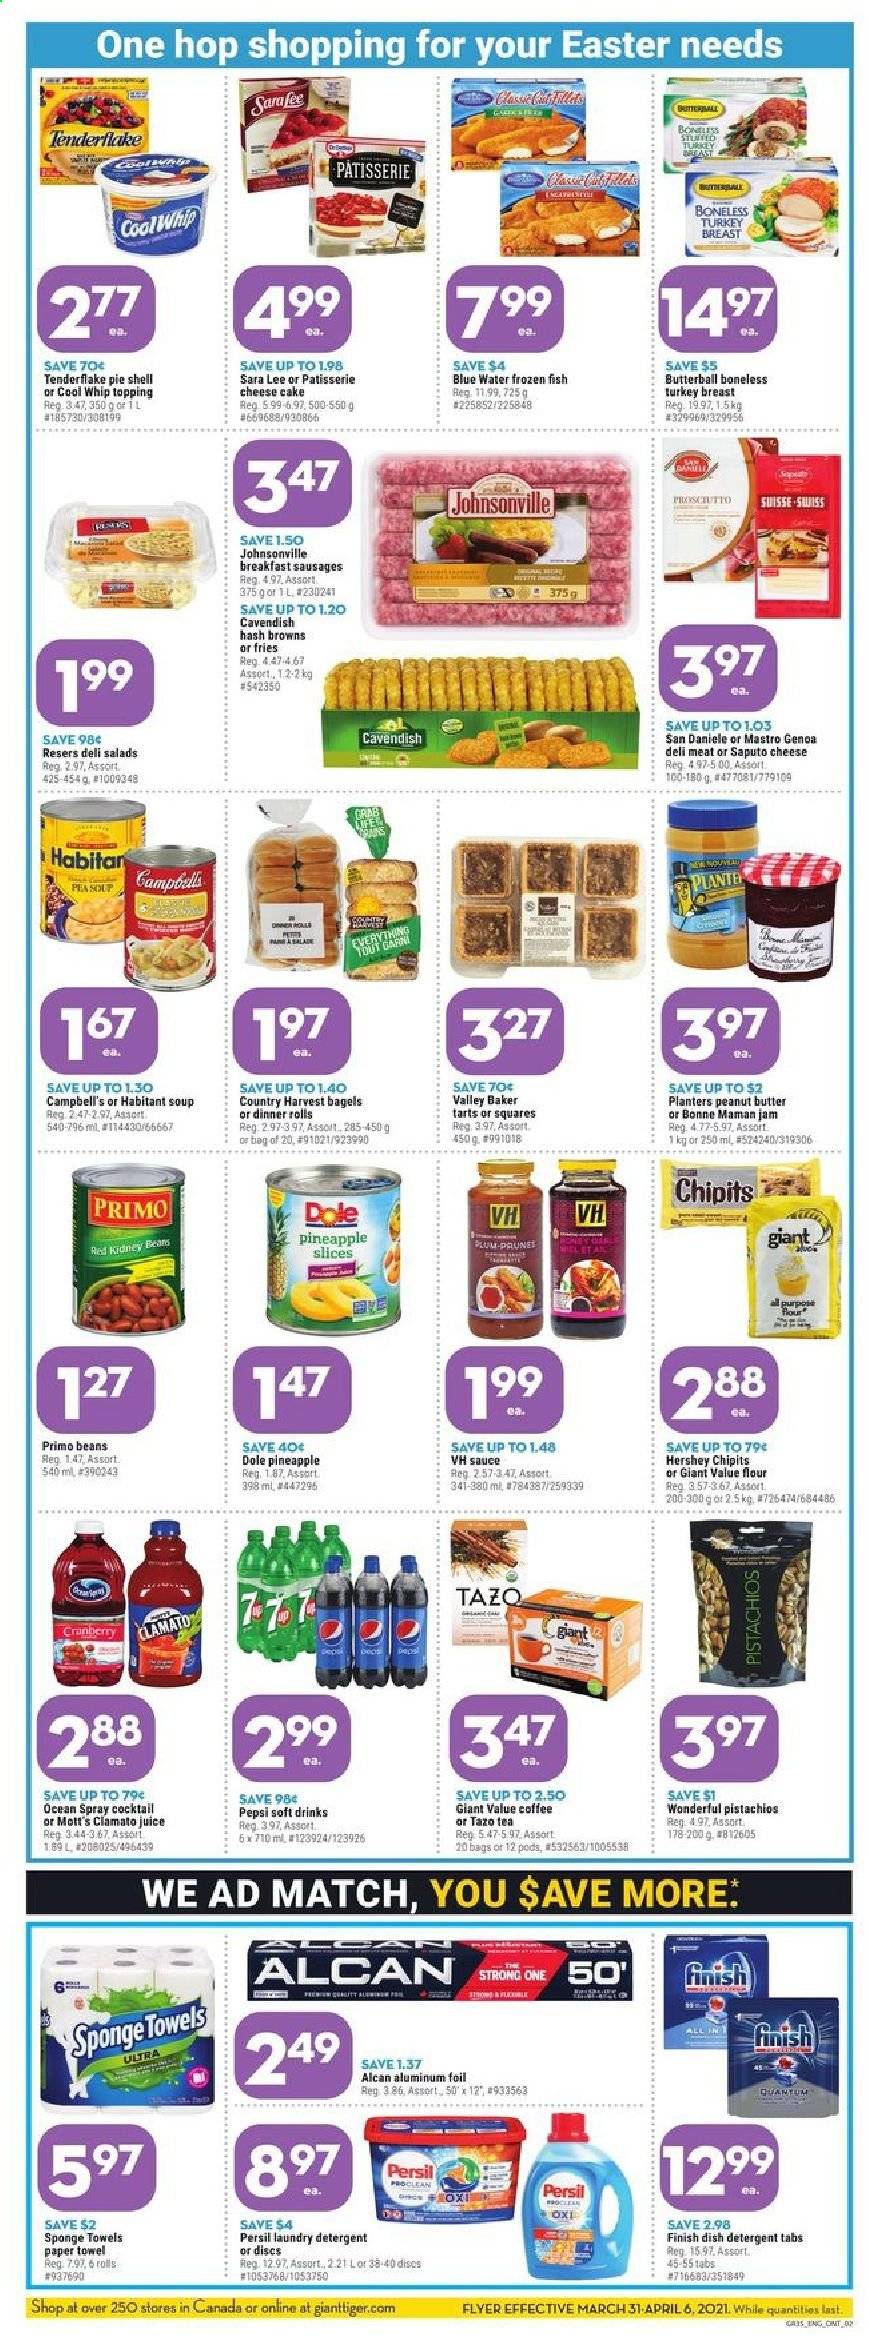 thumbnail - Giant Tiger Flyer - March 31, 2021 - April 06, 2021 - Sales products - bagels, cake, pie, Sara Lee, cheesecake, Dole, pineapple, Mott's, fish, Campbell's, soup, sauce, Butterball, Johnsonville, sausage, cheese, Cool Whip, Country Harvest, hash browns, potato fries, flour, topping, kidney beans, fruit jam, peanut butter, prunes, dried fruit, pistachios, Planters, Pepsi, juice, Clamato, soft drink, tea, coffee, L'Or, turkey breast, turkey, paper towels, Persil, laundry detergent, sponge, aluminium foil, Shell. Page 2.